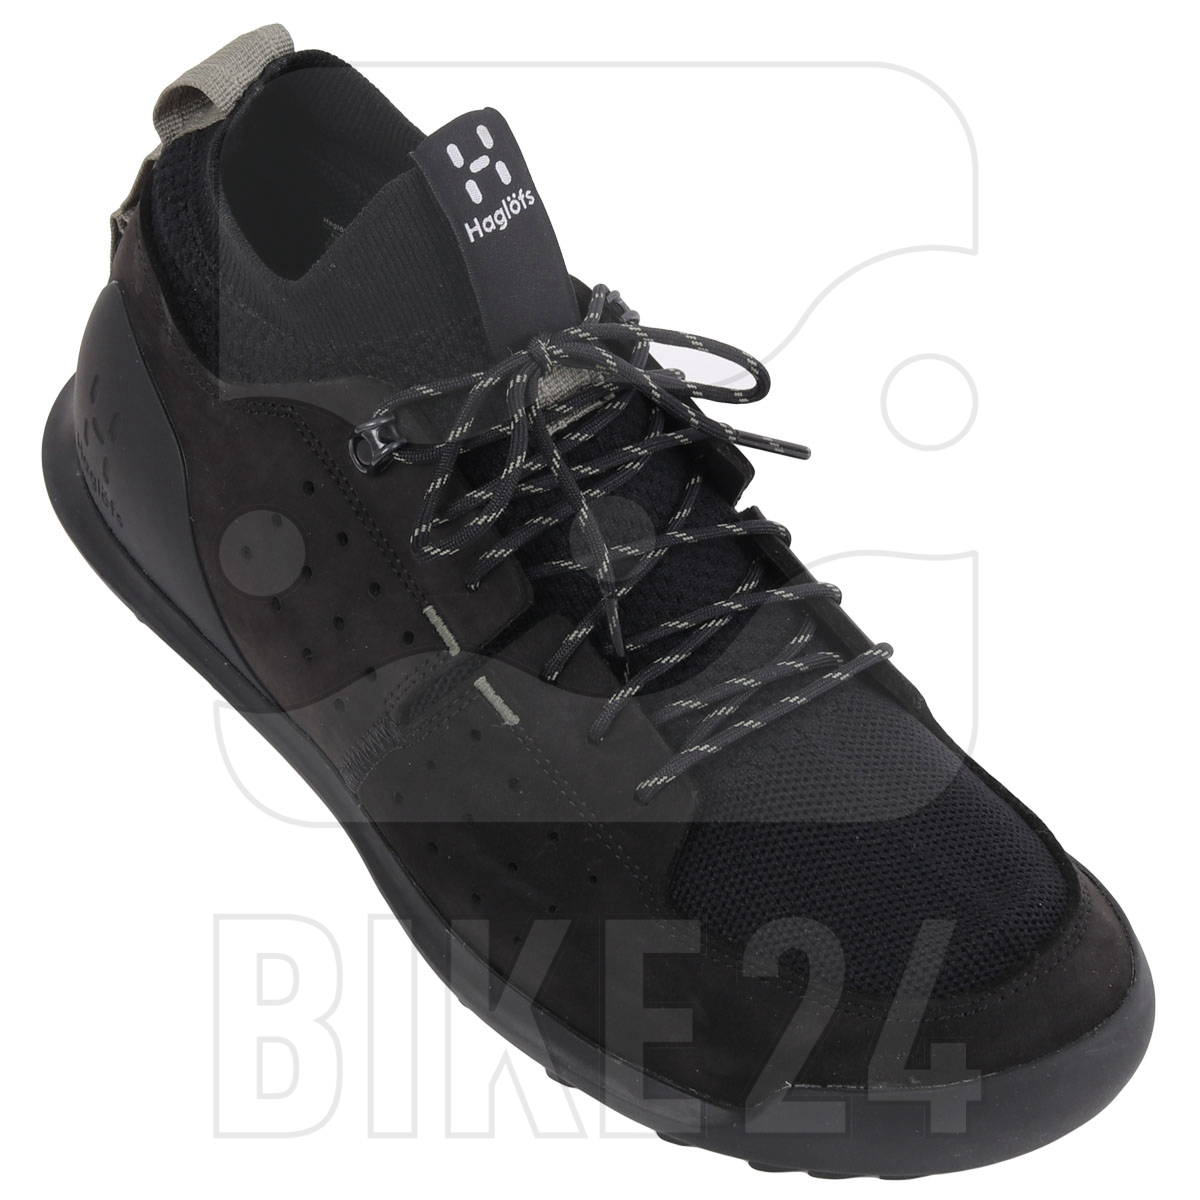 Picture of Haglöfs Duality AT2 Hiking Shoe - deep woods/true black 3NR